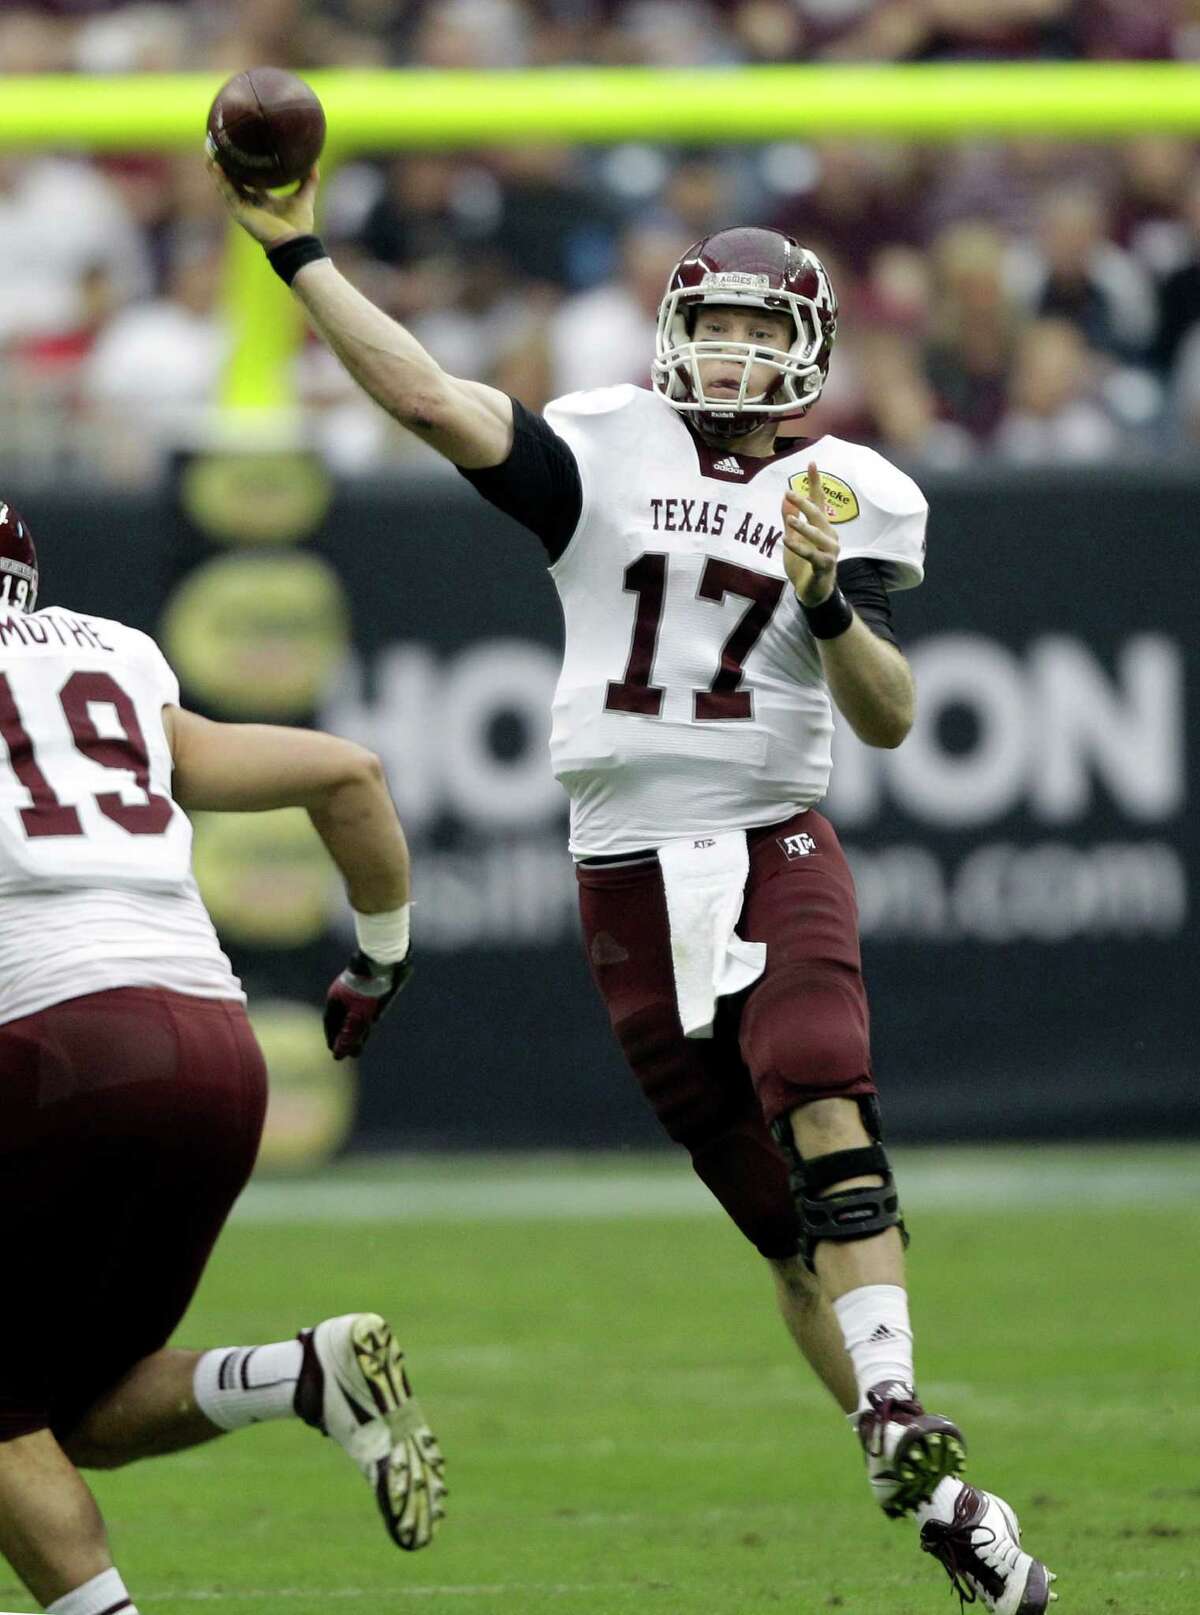 FOR USE AS DESIRED WITH NFL DRAFT STORIES - FILE - In this Dec. 31, 2011, file photo, Texas A&M quarterback Ryan Tannehill (17) throws a pass against Northwestern during the first quarter of the Car Care Bowl NCAA college football game in Houston. Tennehill is a top prospect in the upcoming NFL football draft.